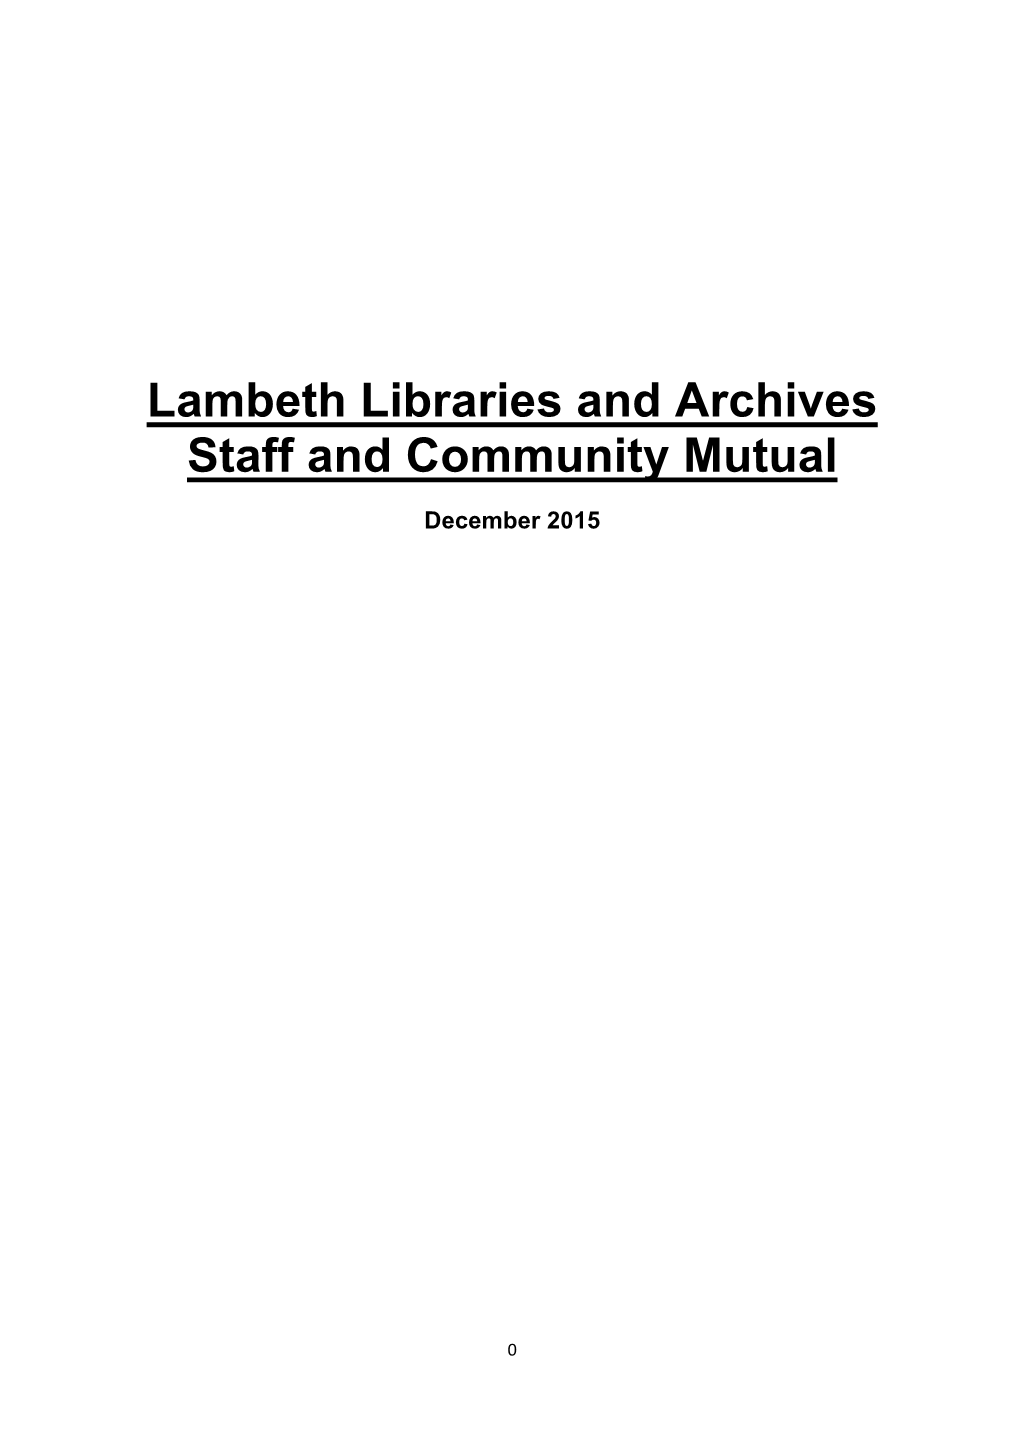 Lambeth Libraries and Archives Staff and Community Mutual